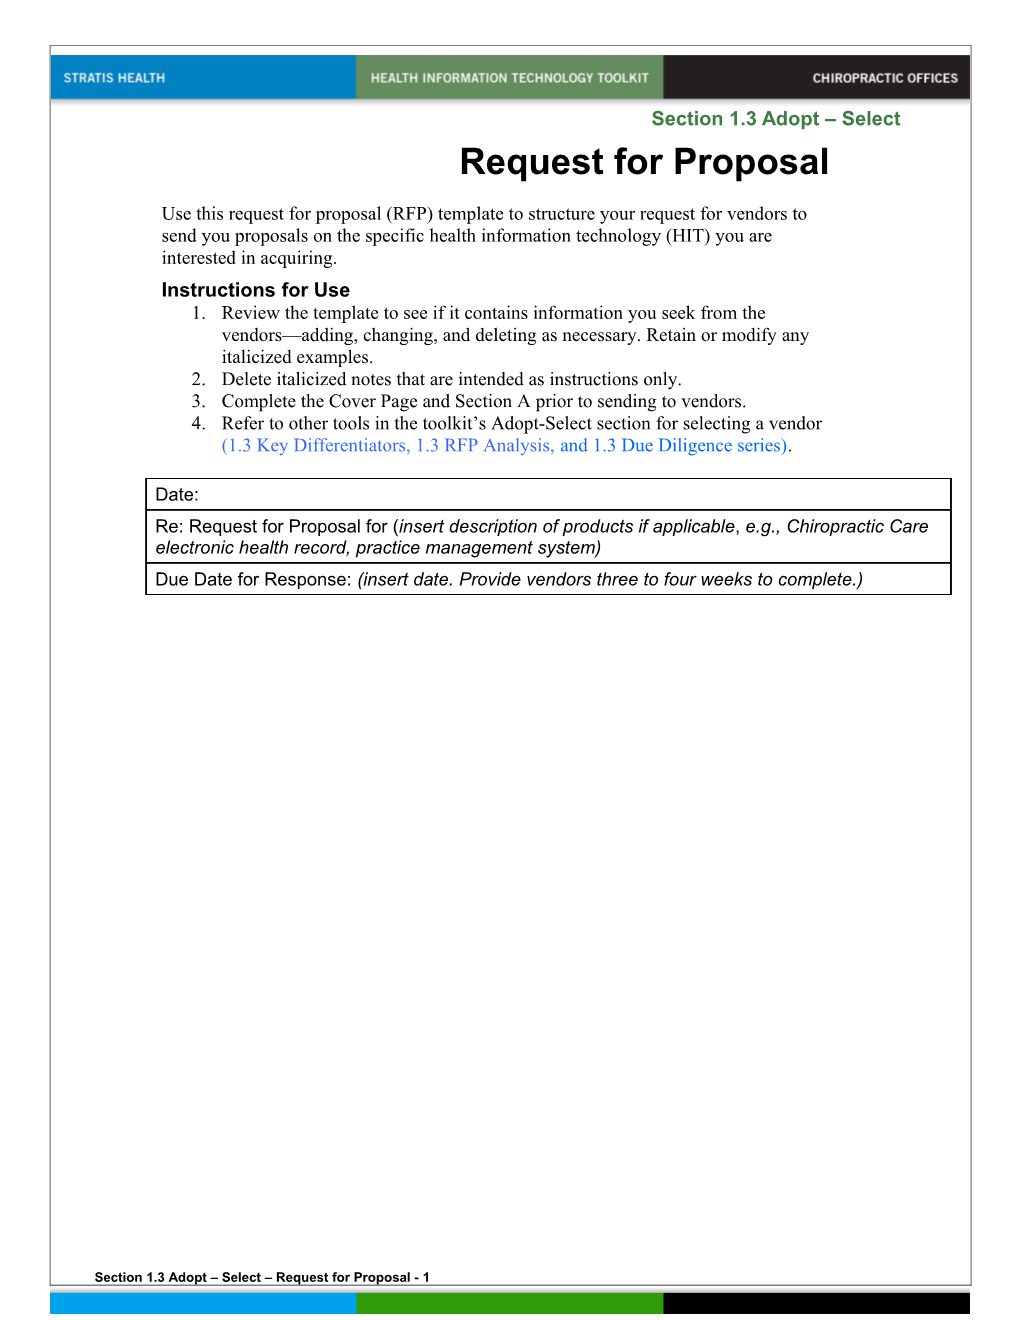 1.3 Request for Proposal